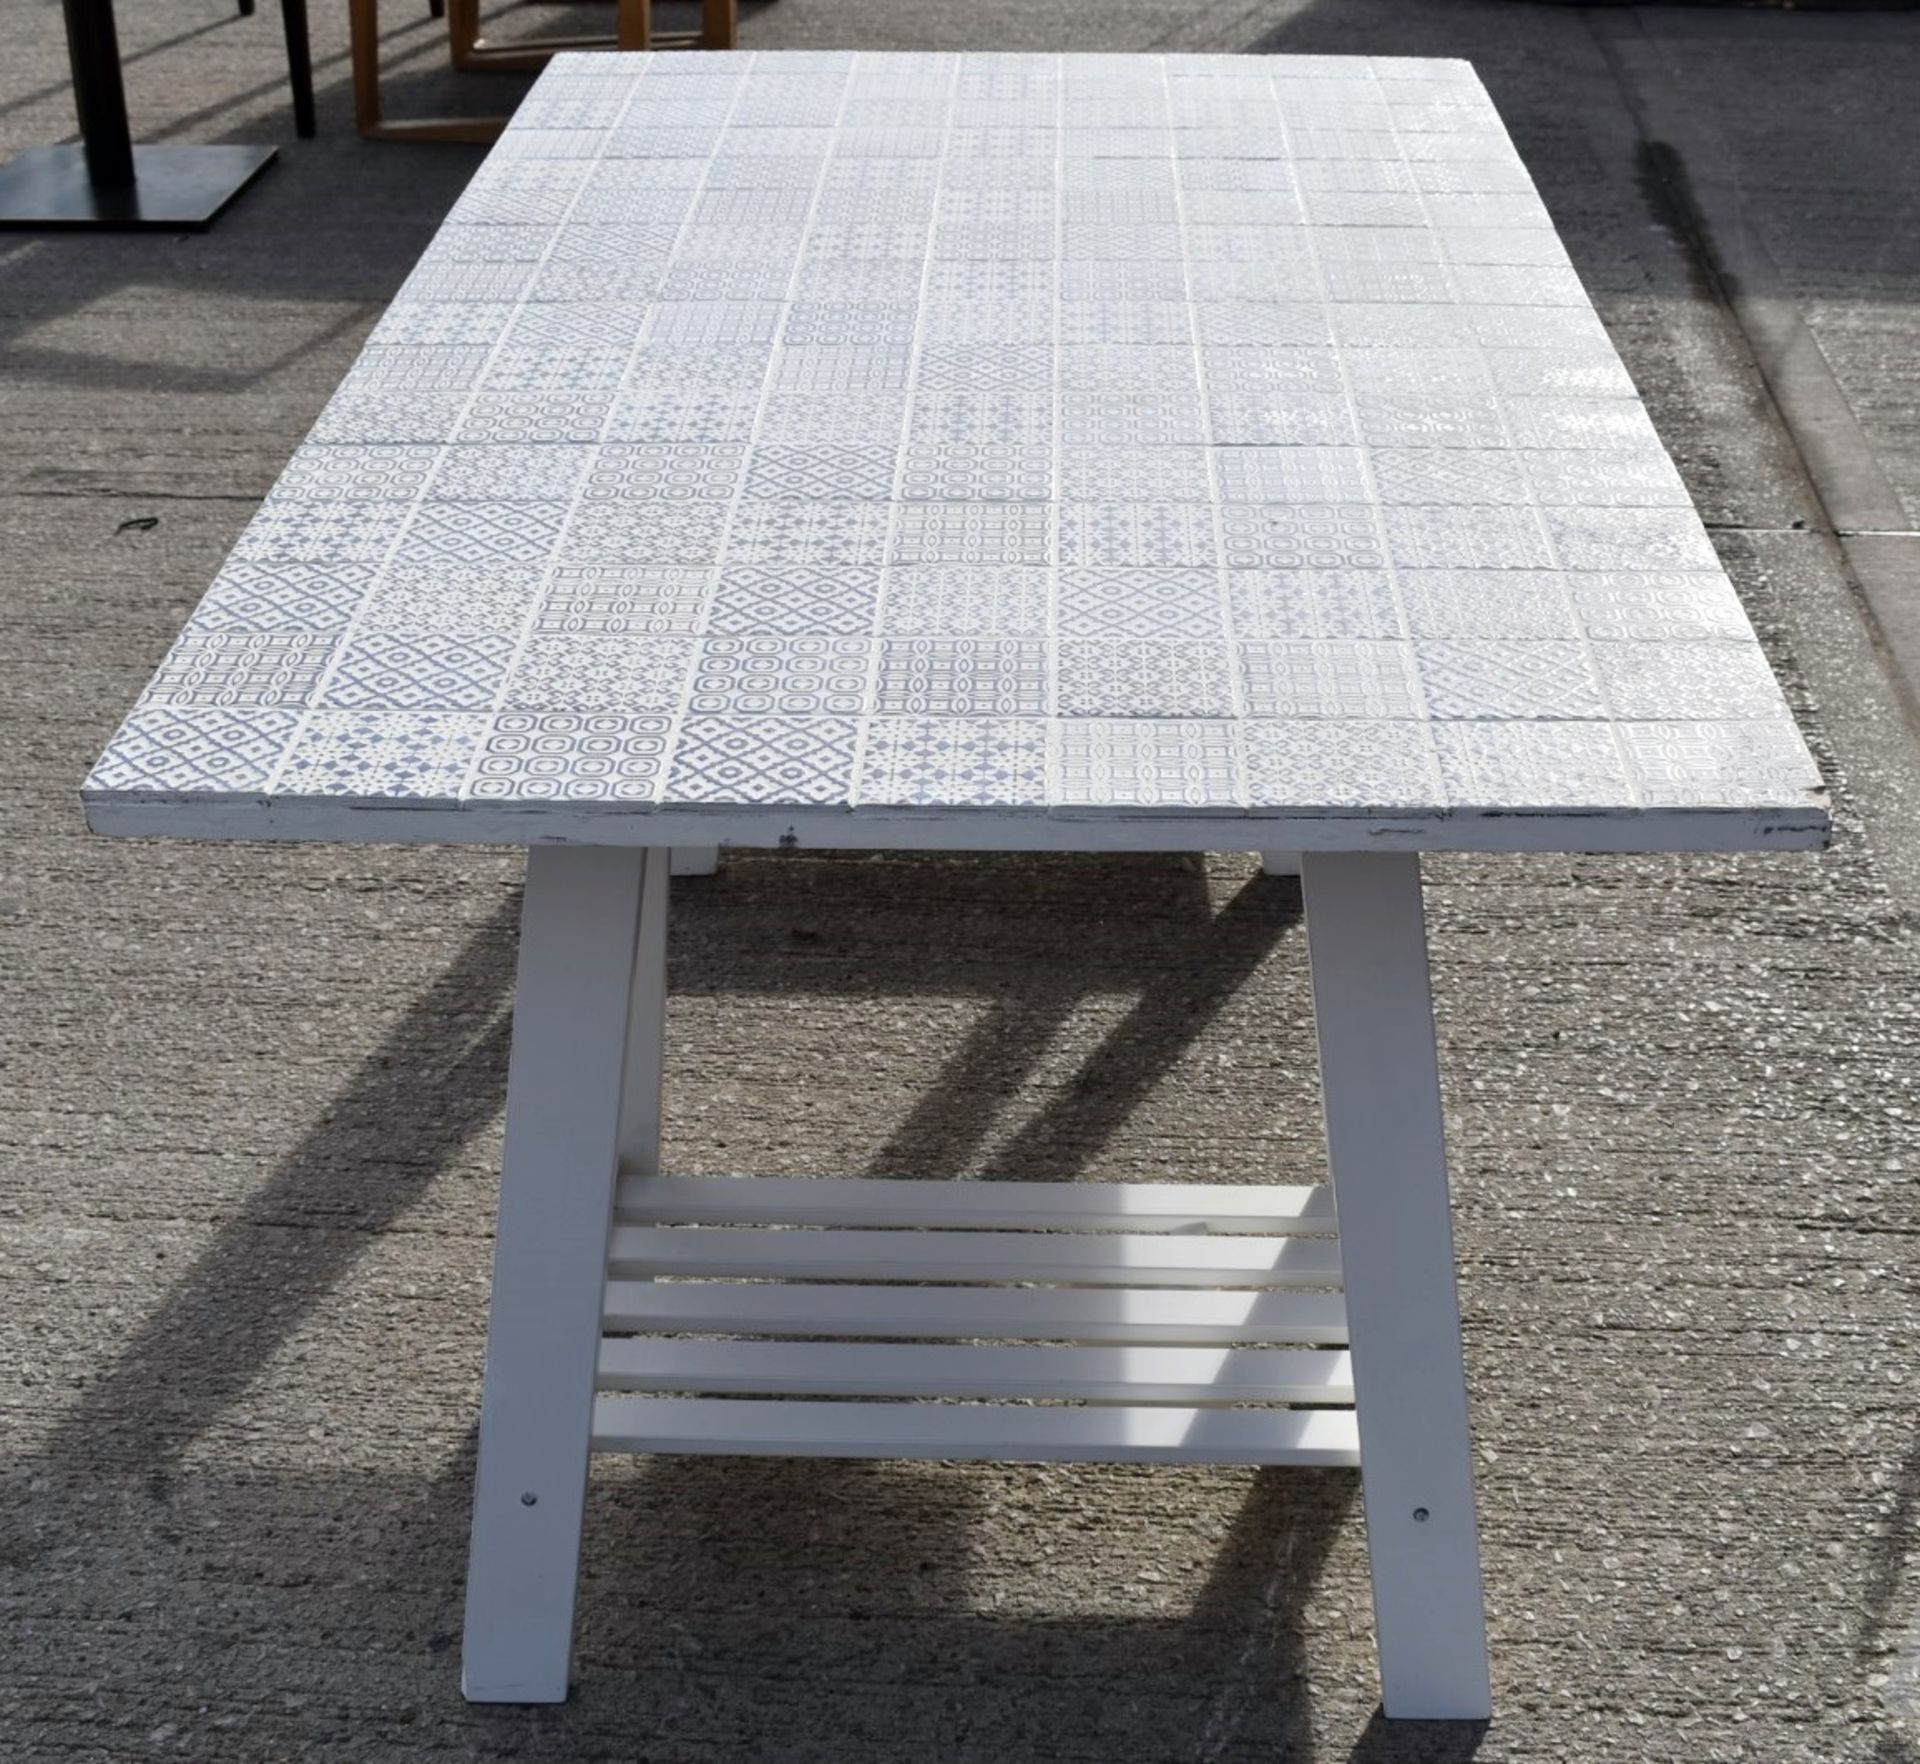 1 x Bespoke Tiled Topped Table With 3 x Tiled Plinths - Department Store Display Prop - Ref: - Image 8 of 8